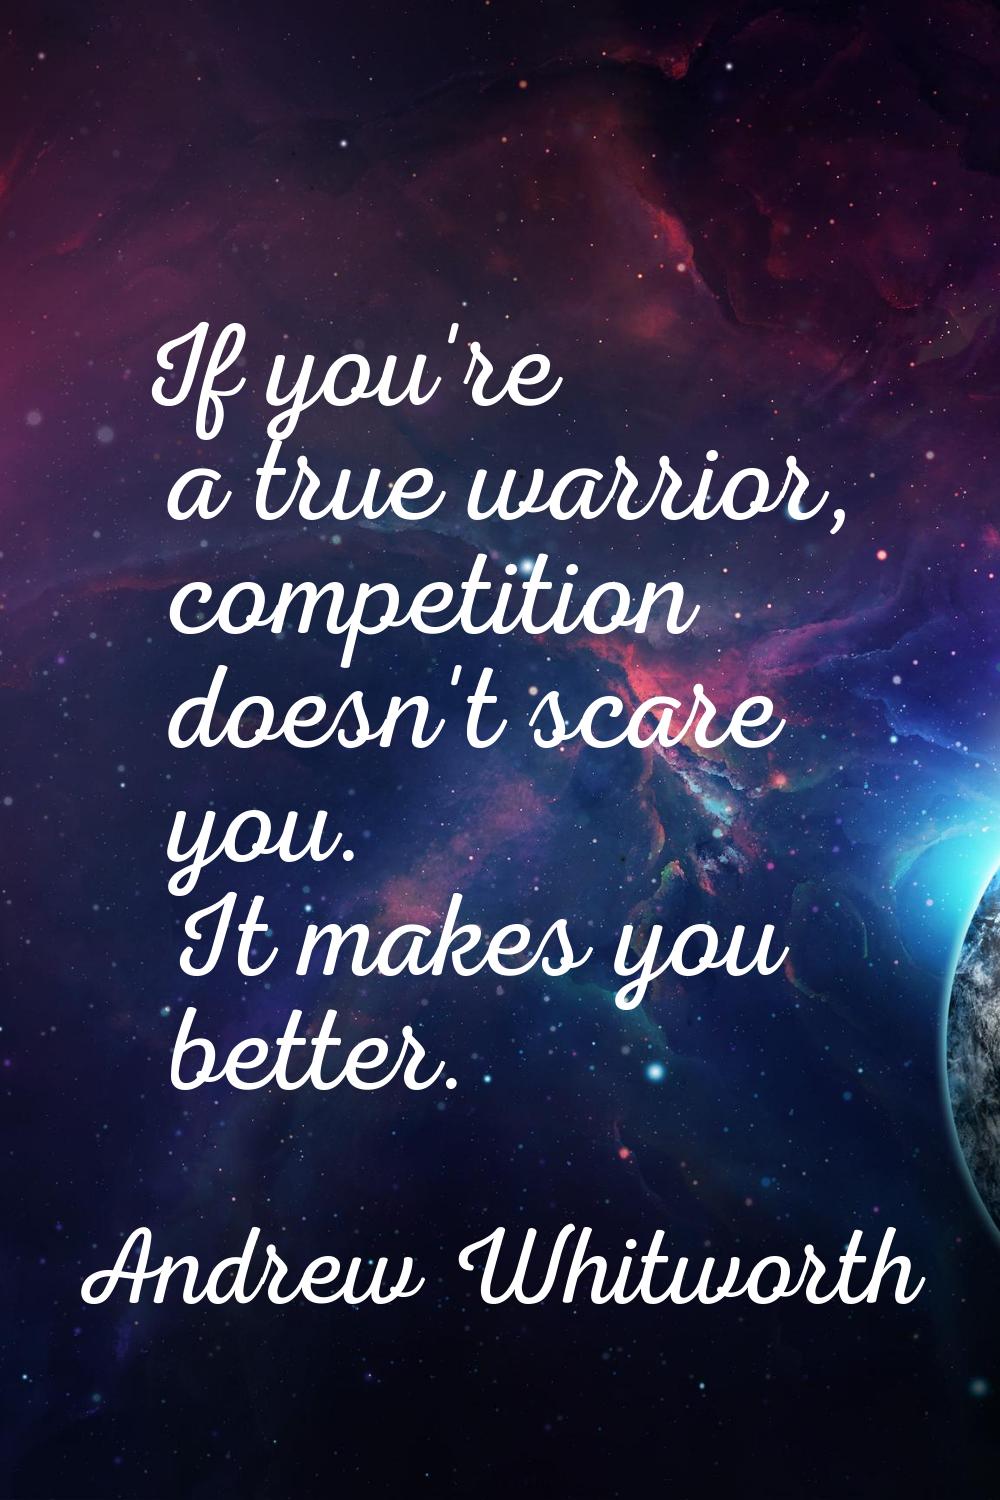 If you're a true warrior, competition doesn't scare you. It makes you better.